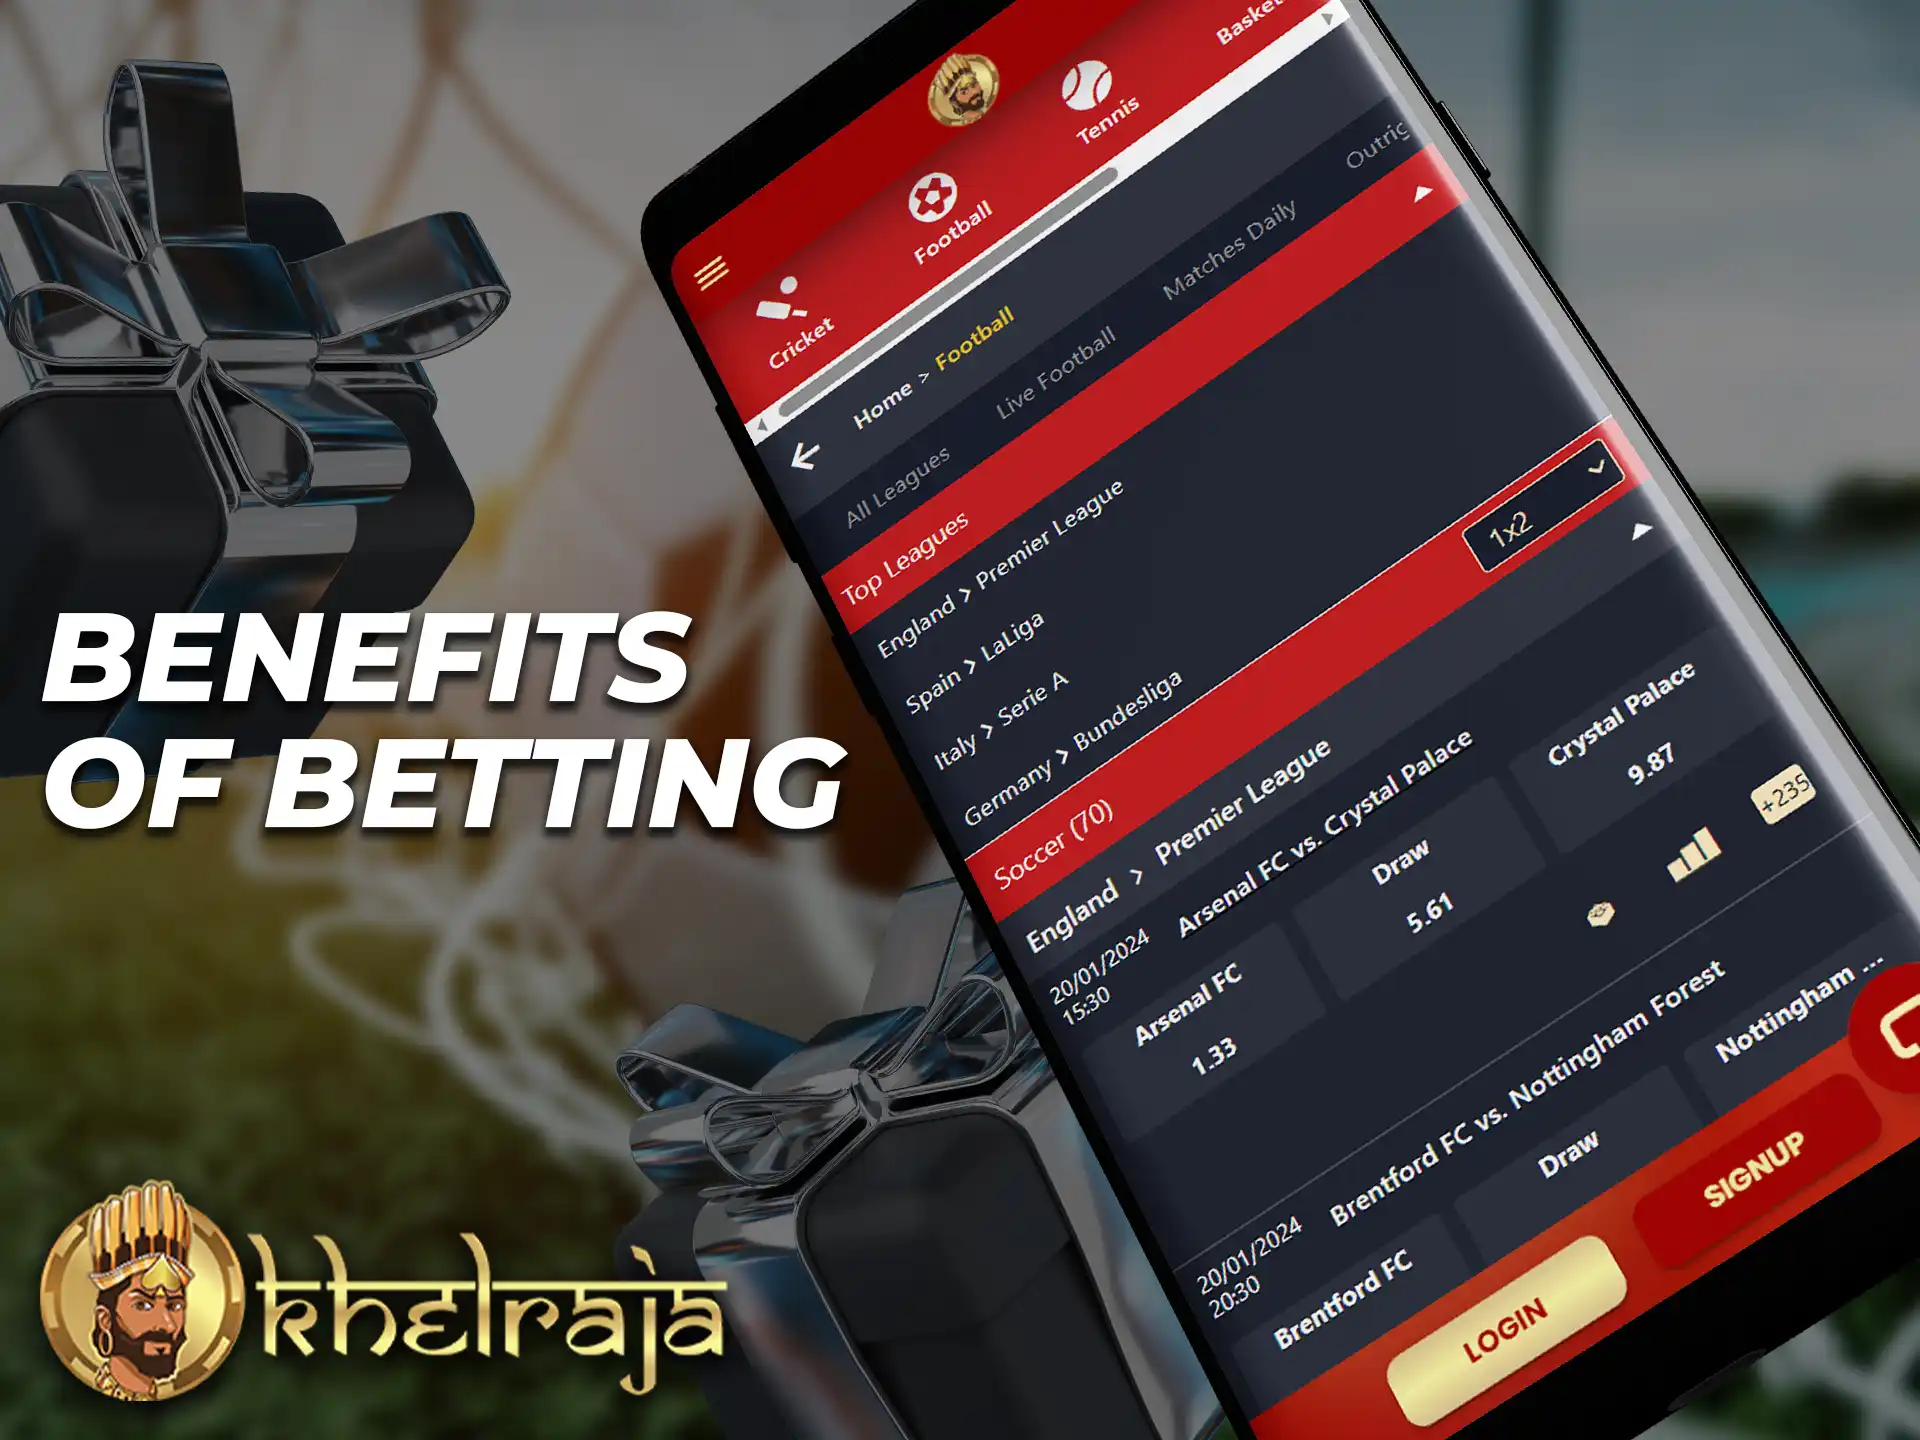 Check out the basic benefits of betting through the Khelraja mobile app.